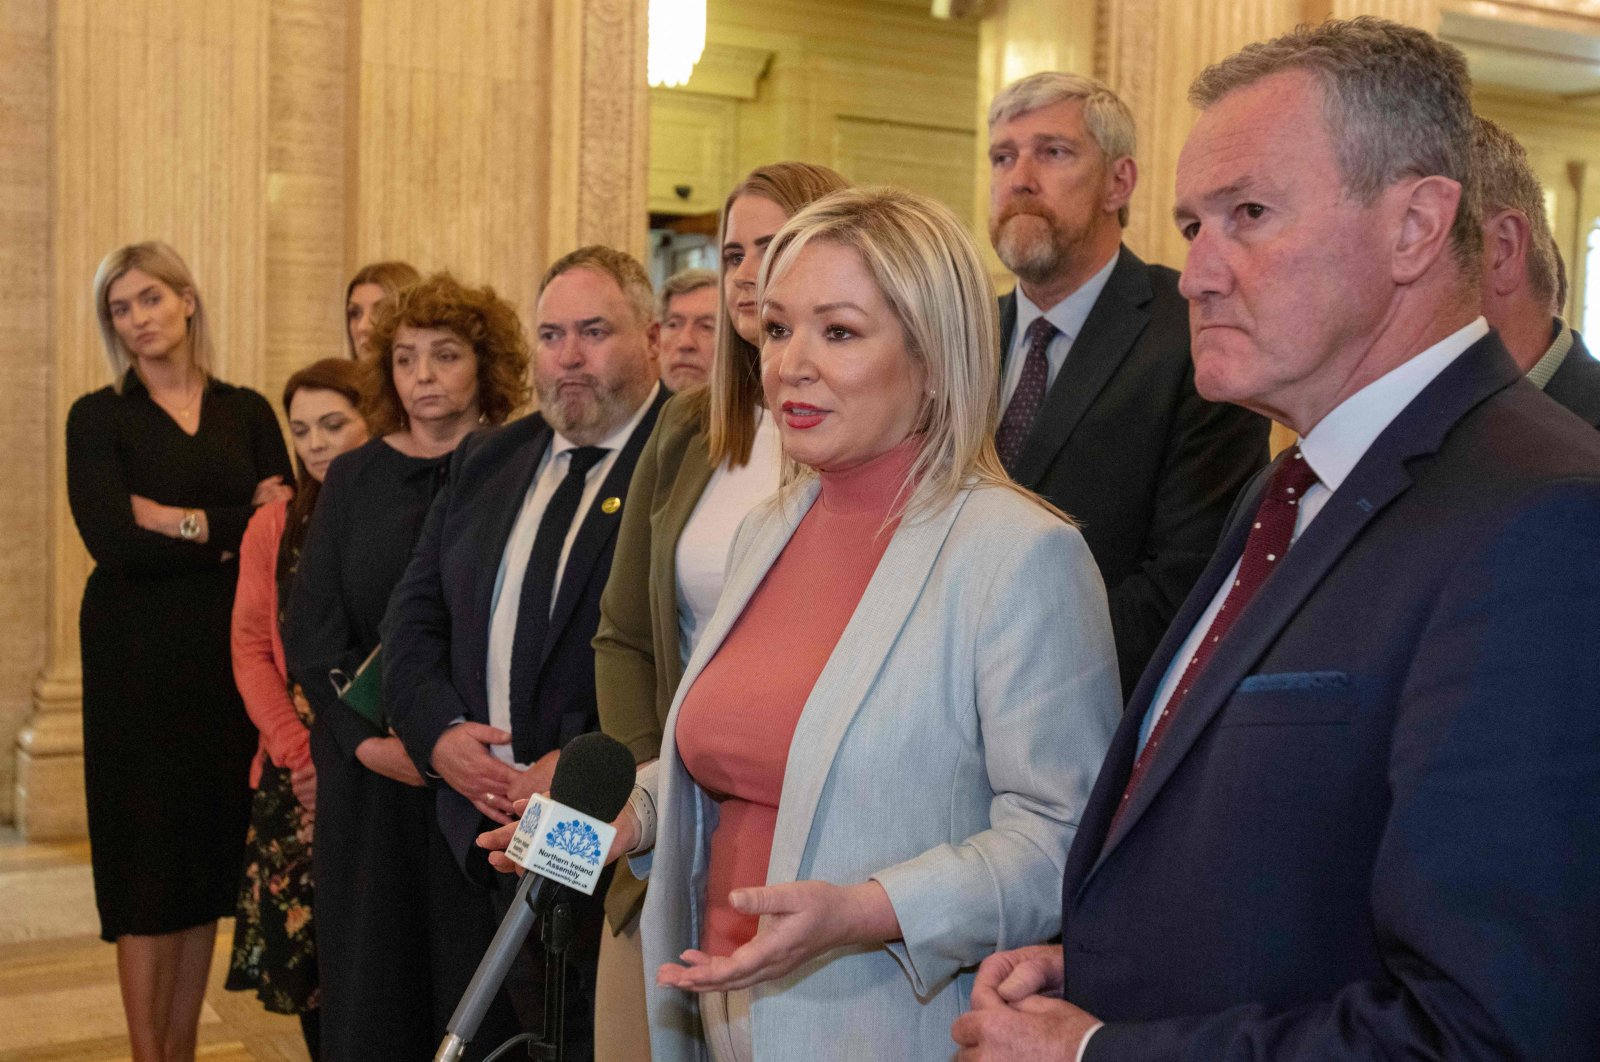 Northern Ireland&#039;s Deputy First Minister and Sinn Fein party leader Michelle O&#039;Neill (C) and her Assembly team emerge from the chamber after the Democratic Unionist Party (DUP) failed to nominate a speaker, stopping the election of a first and deputy first minister, Stormont Estate, Belfast, Northern Ireland, on May 13, 2022. (AFP Photo)